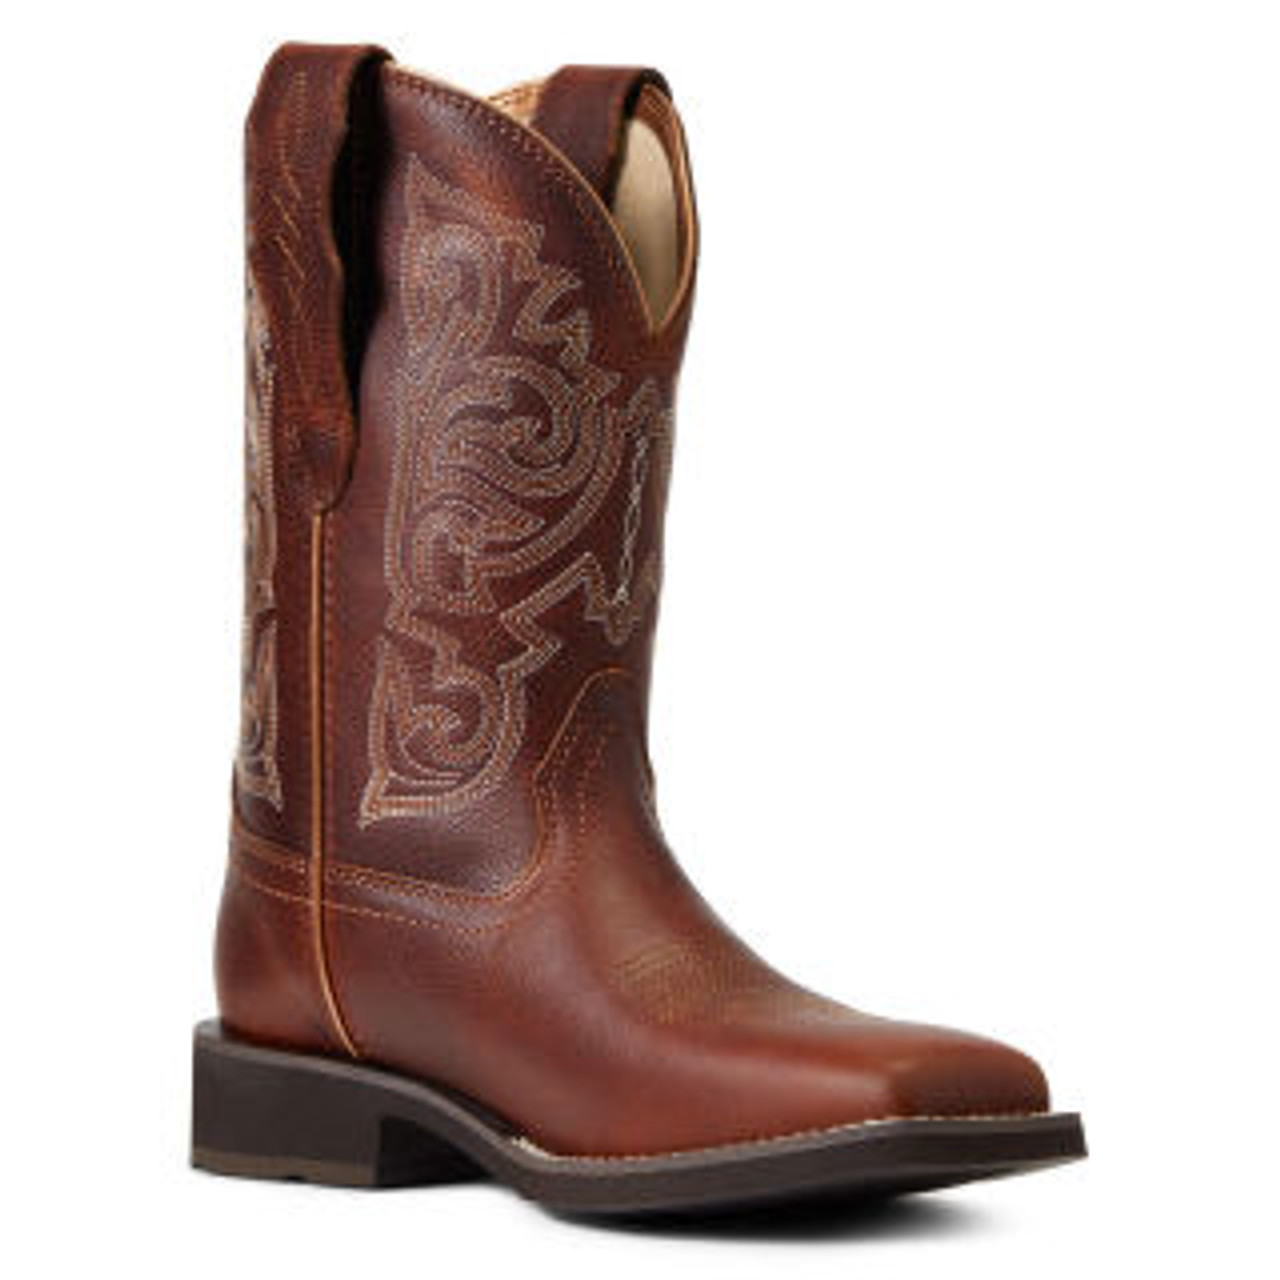 Ariat Women's Boots - Delilah Stretch Fit - Spiced Cider - Billy's ...